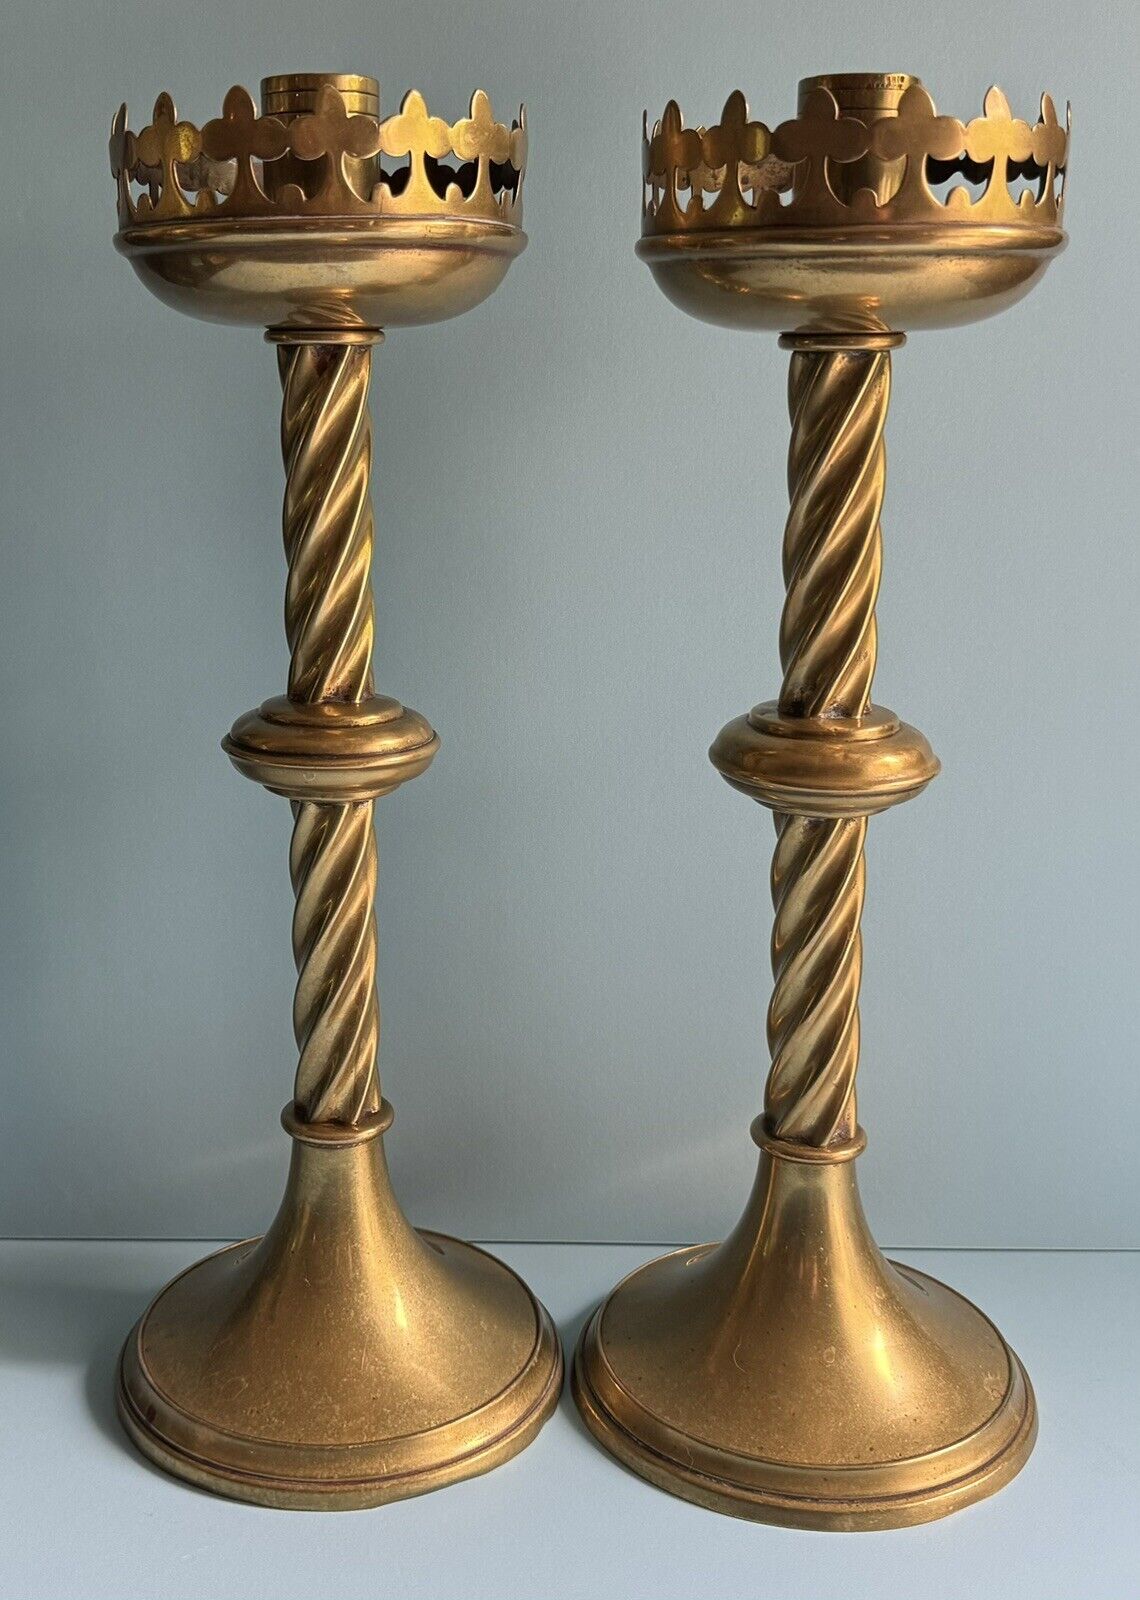 ANTIQUE-BRASS-GOTHIC-CHURCH-ALTAR-TEMPLE-CROSS-CANDLE HOLDERS-LONDON-LATE 1800'S